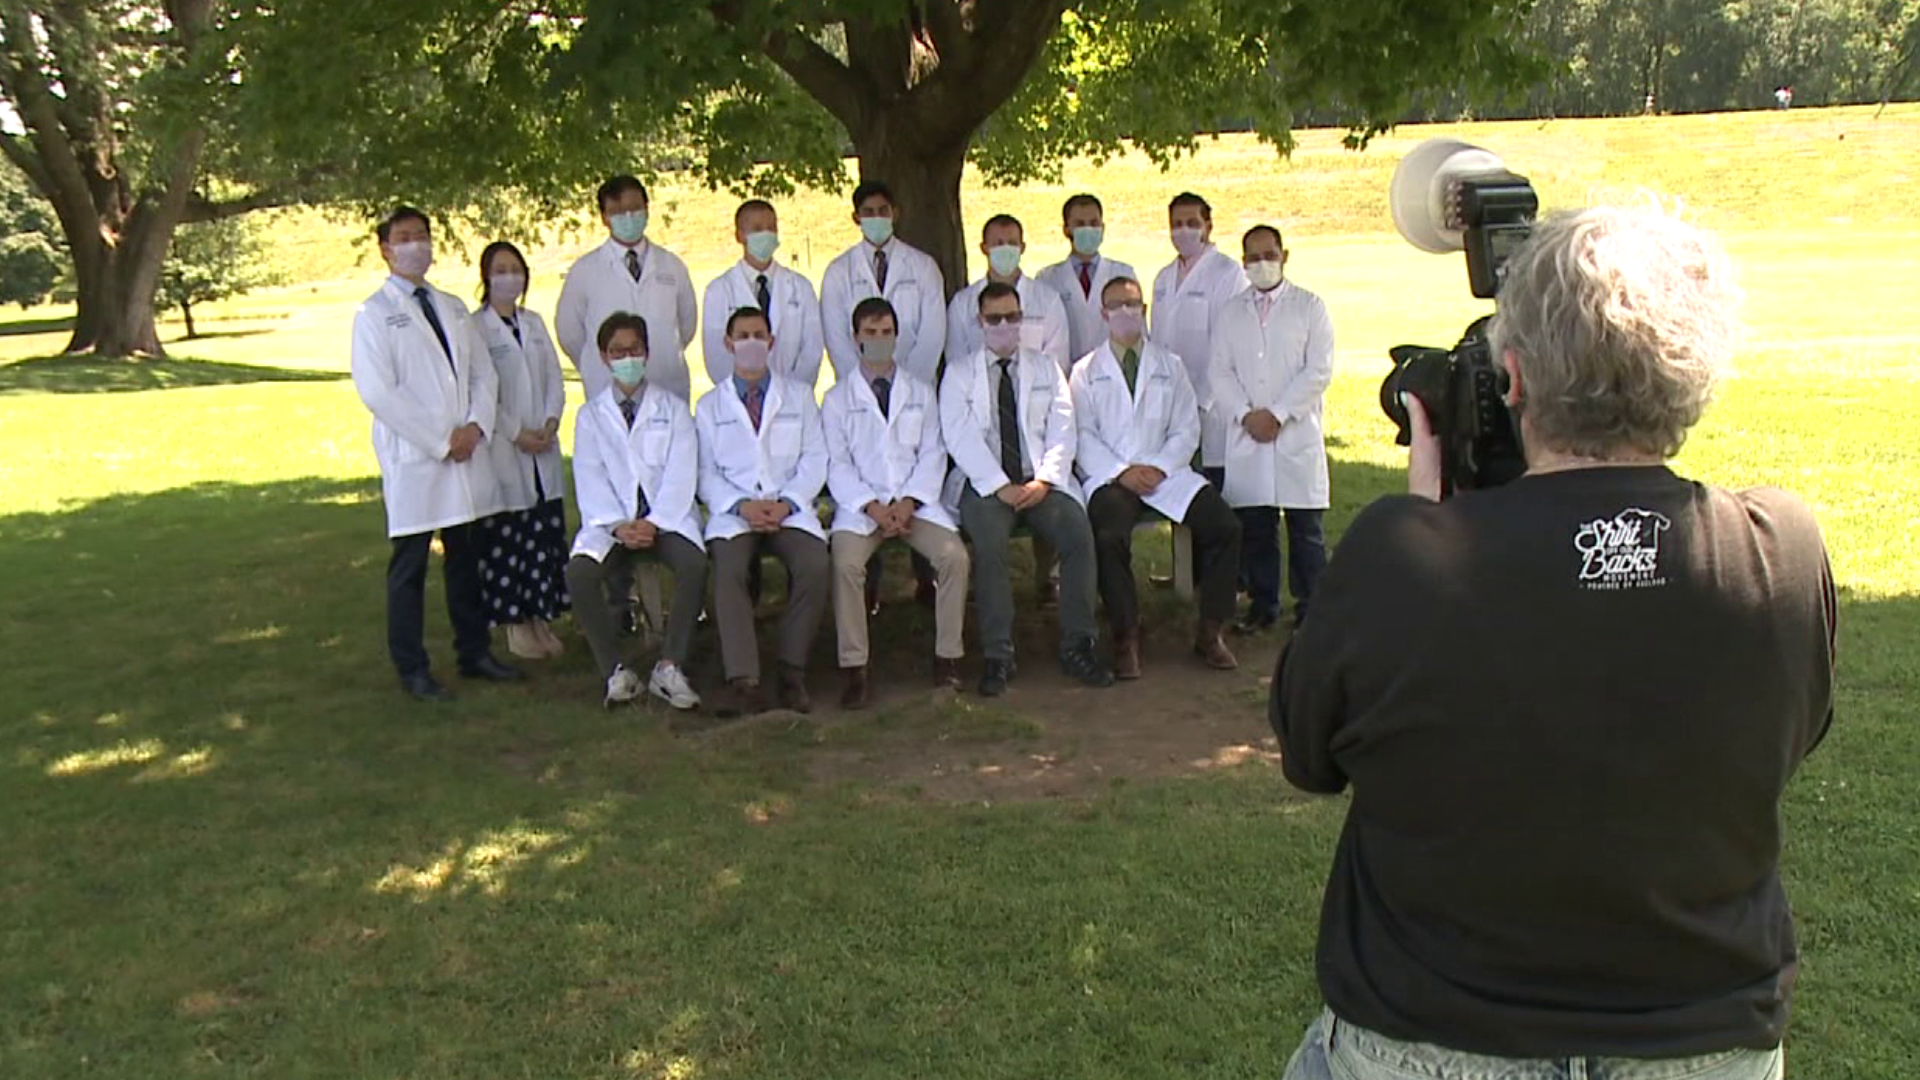 Free photo sessions were held for the medical team of a woman who spent weeks in the hospital in Wilkes-Barre.